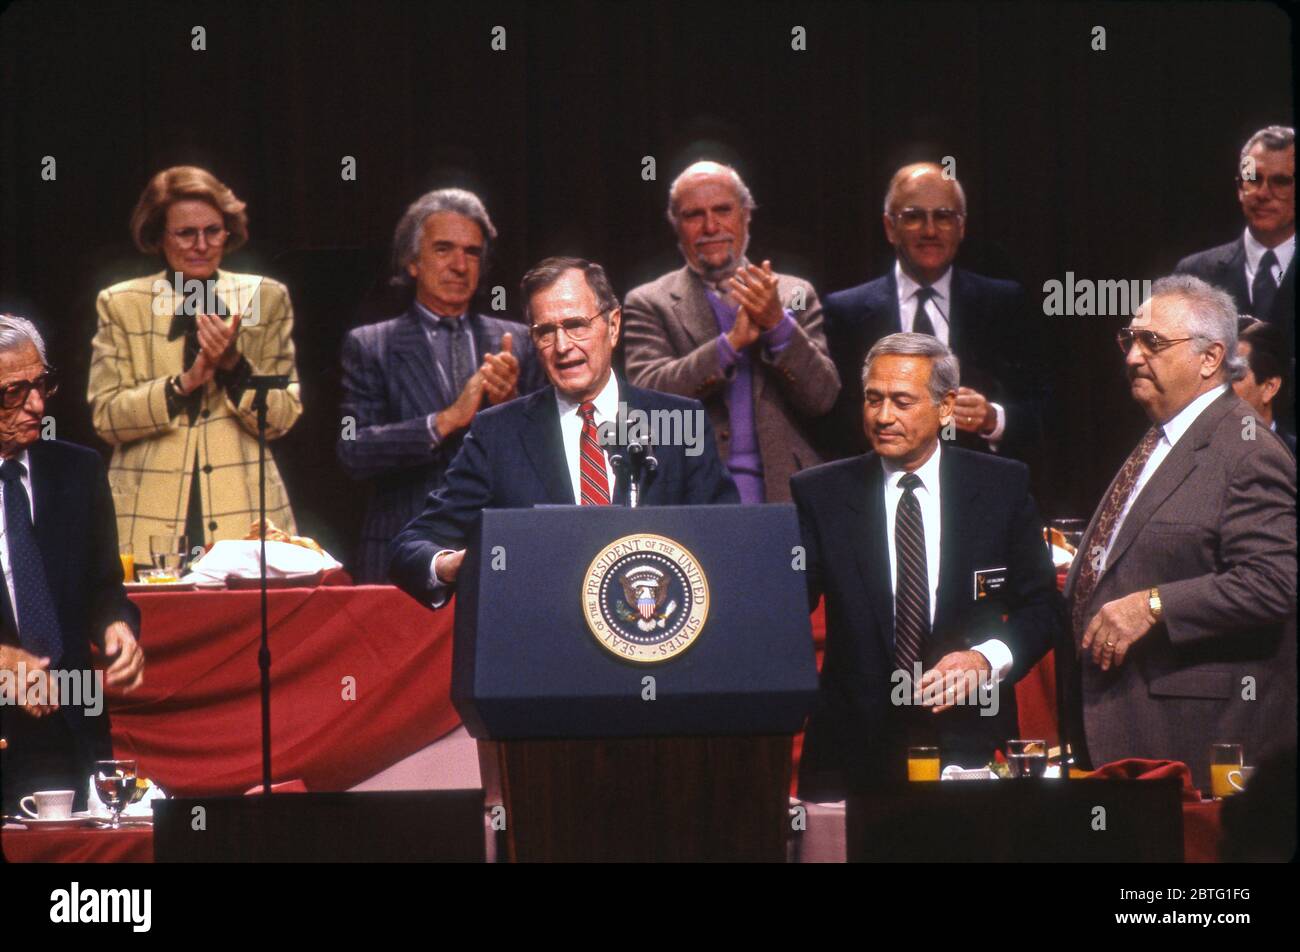 President George Bush addresses members of the Academy of Television Arts and Sciences in Los Angeles, Ca., circa 1990s Stock Photo